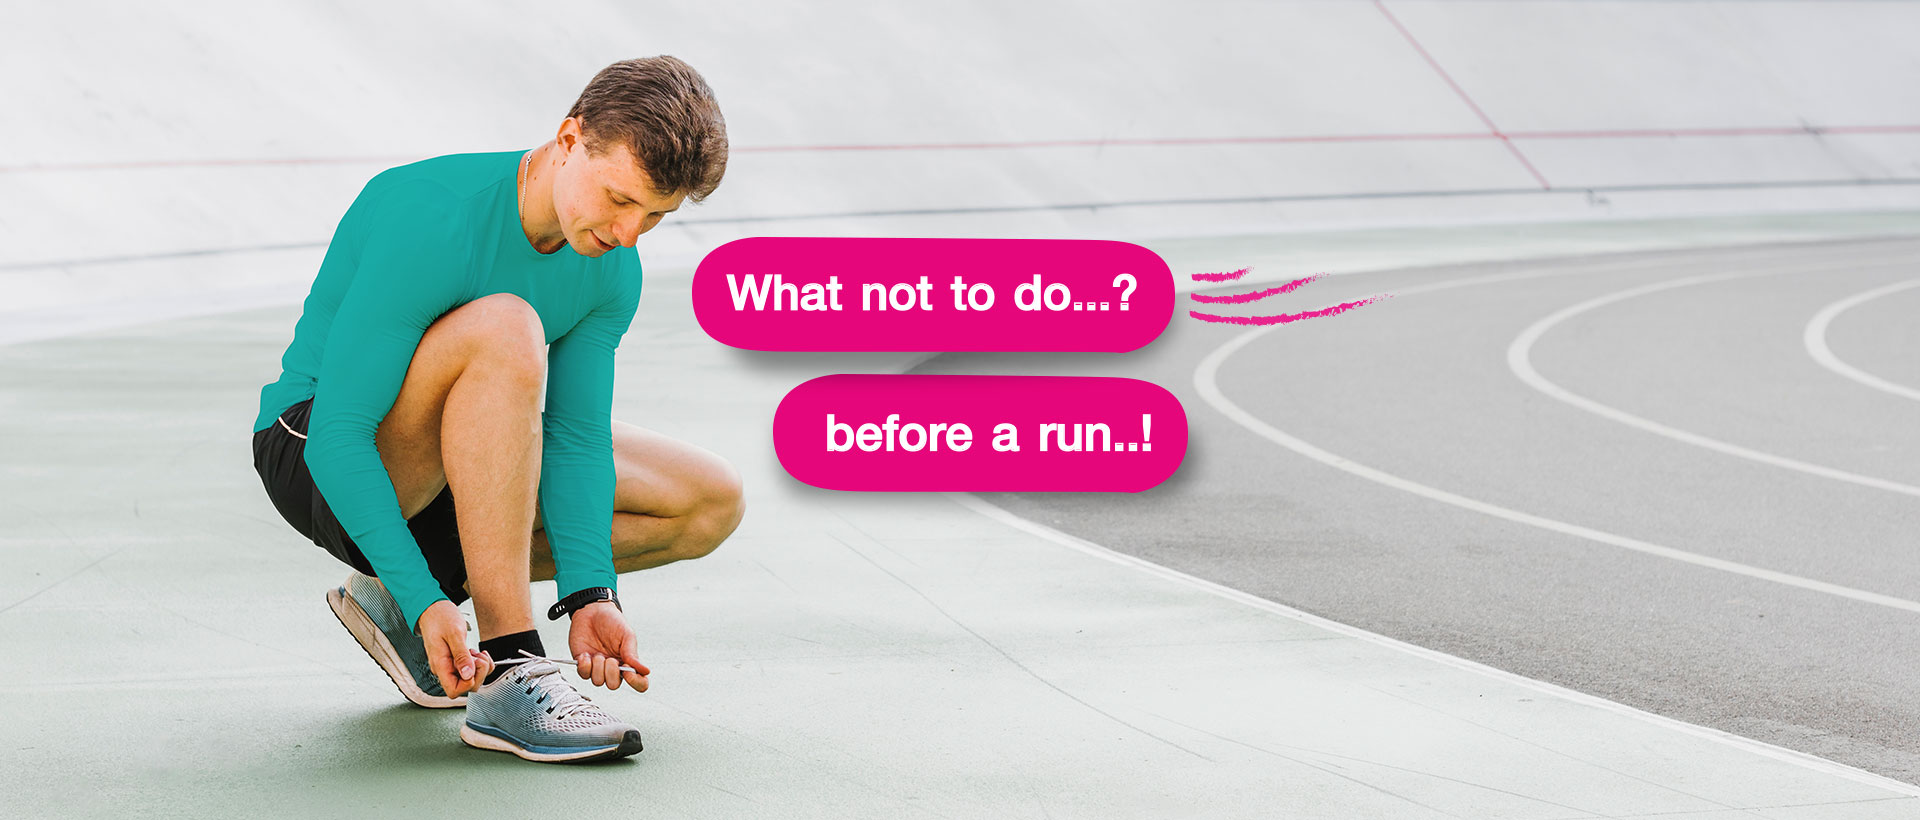 What not to do before a run